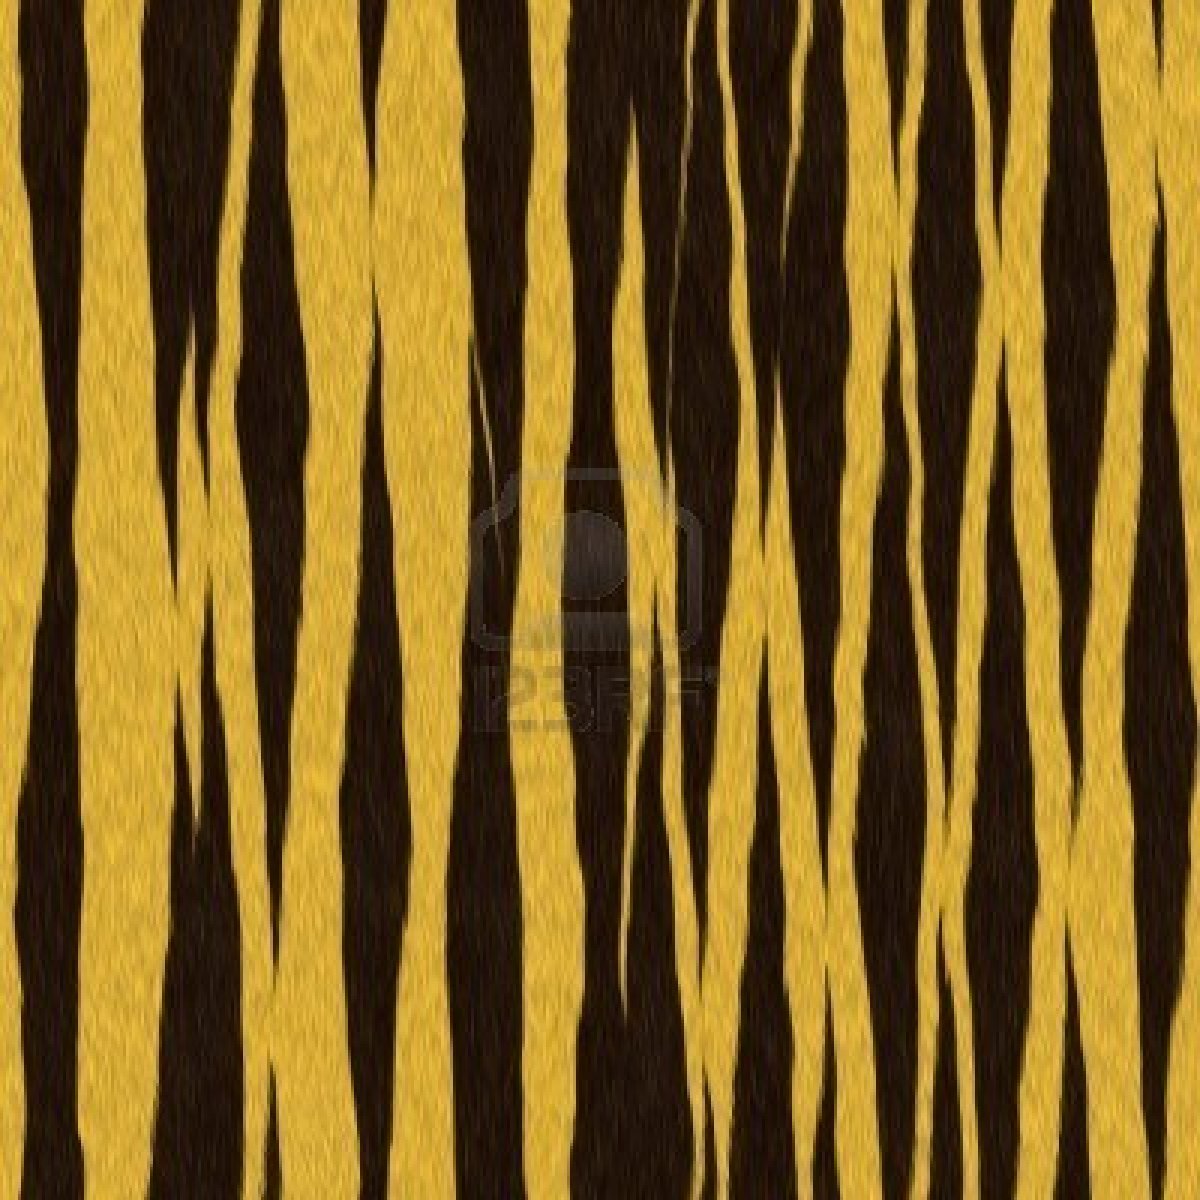 Tiger Fur Texture Abstract Background Seamless Pixel